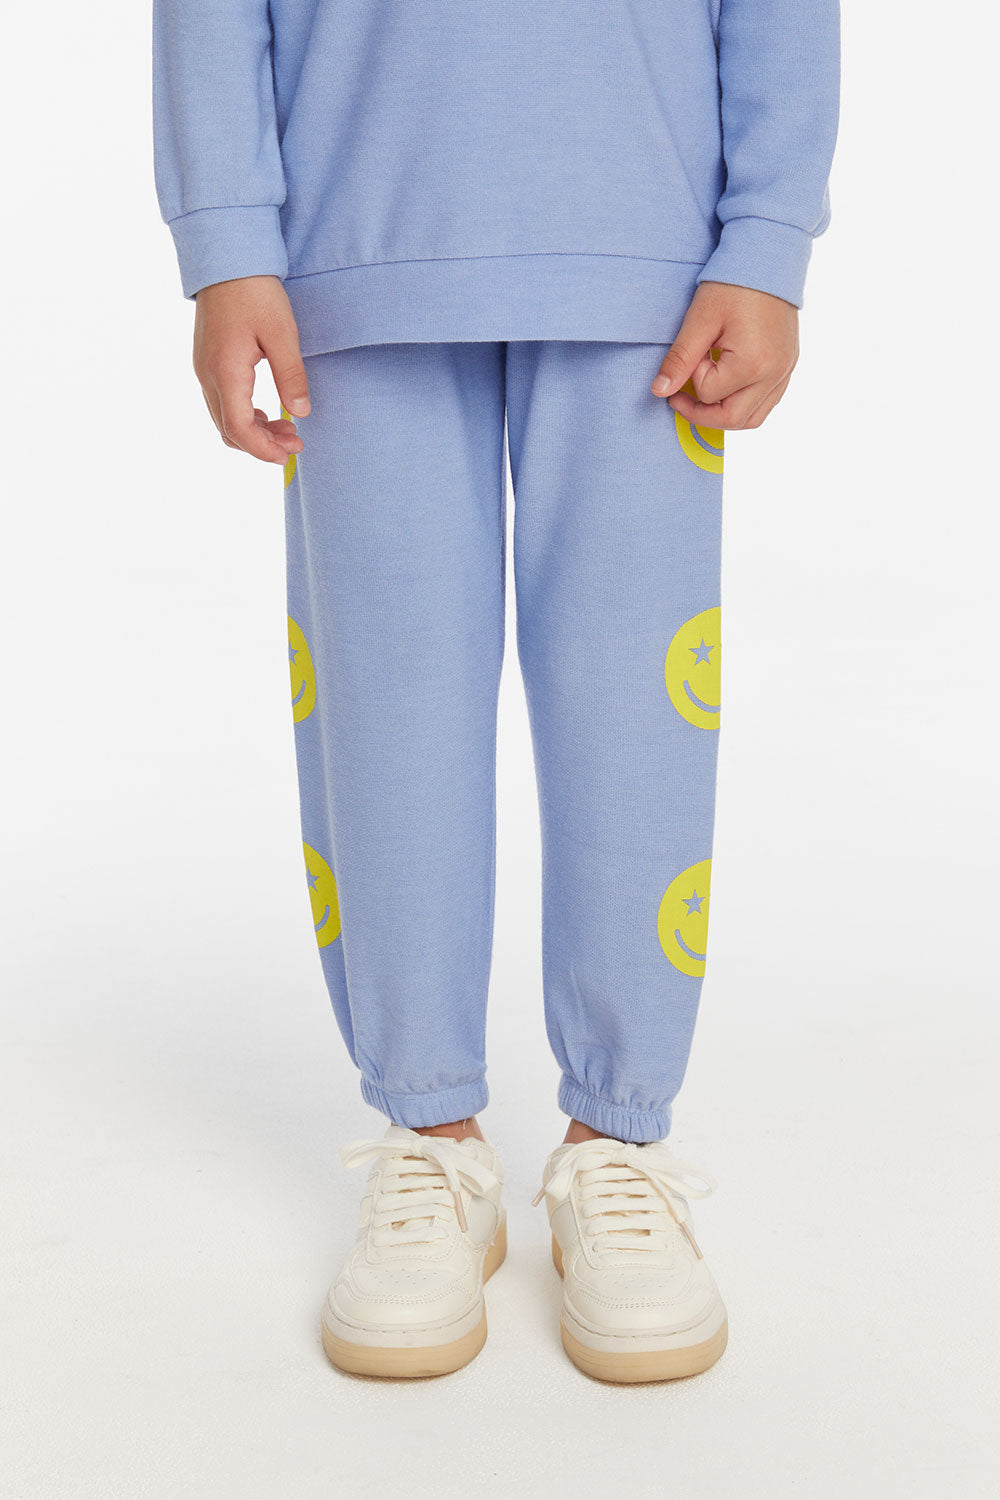 Girls Slouchy Pant - Blue